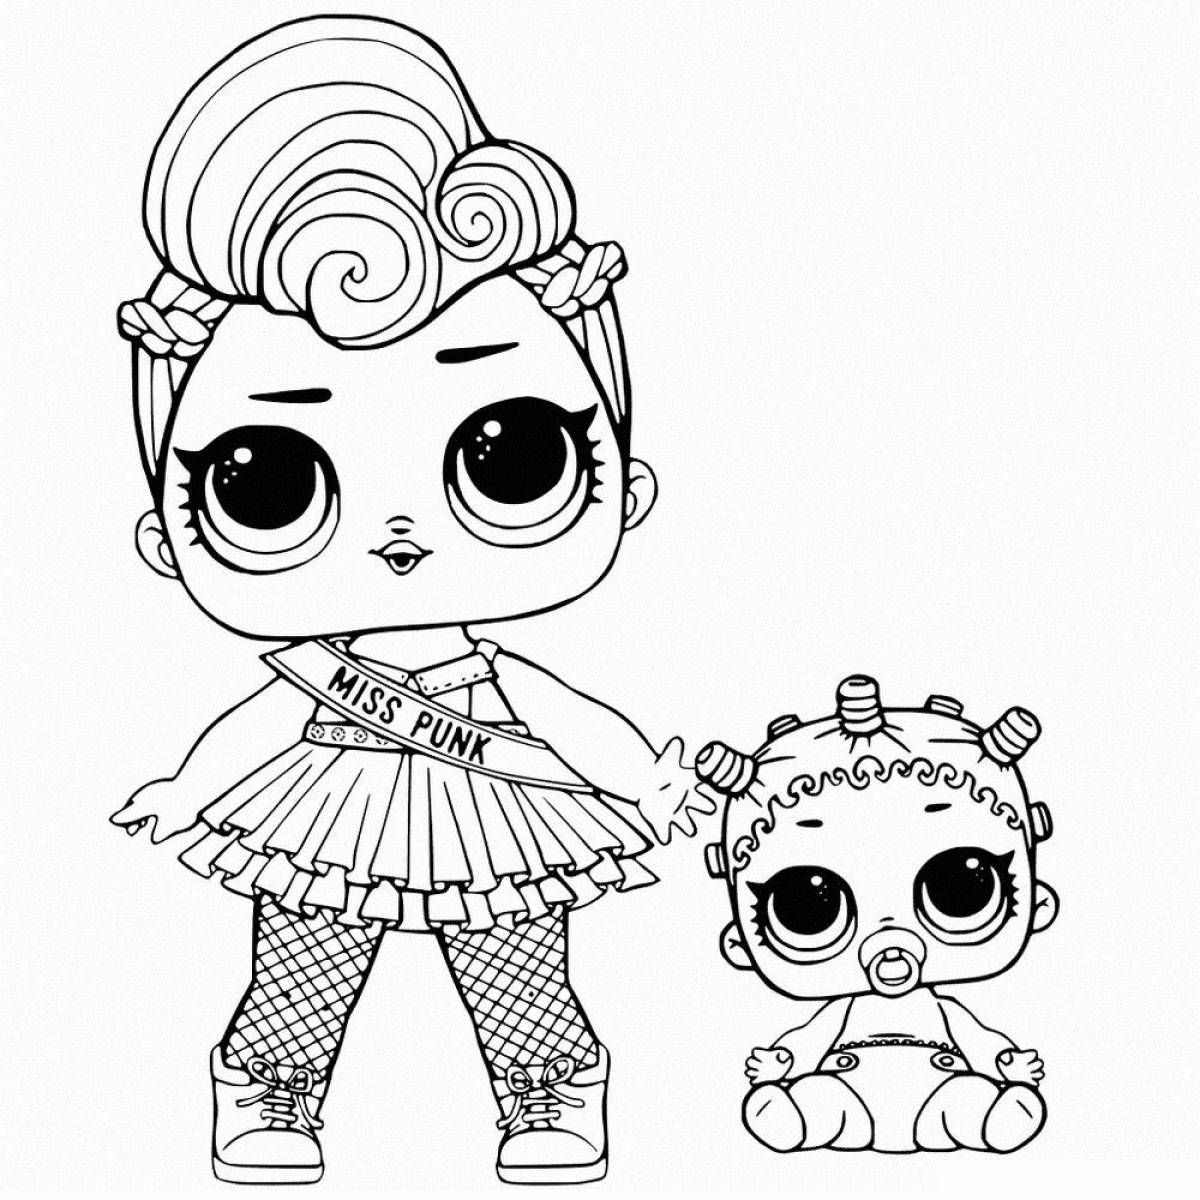 Animated lola doll coloring page